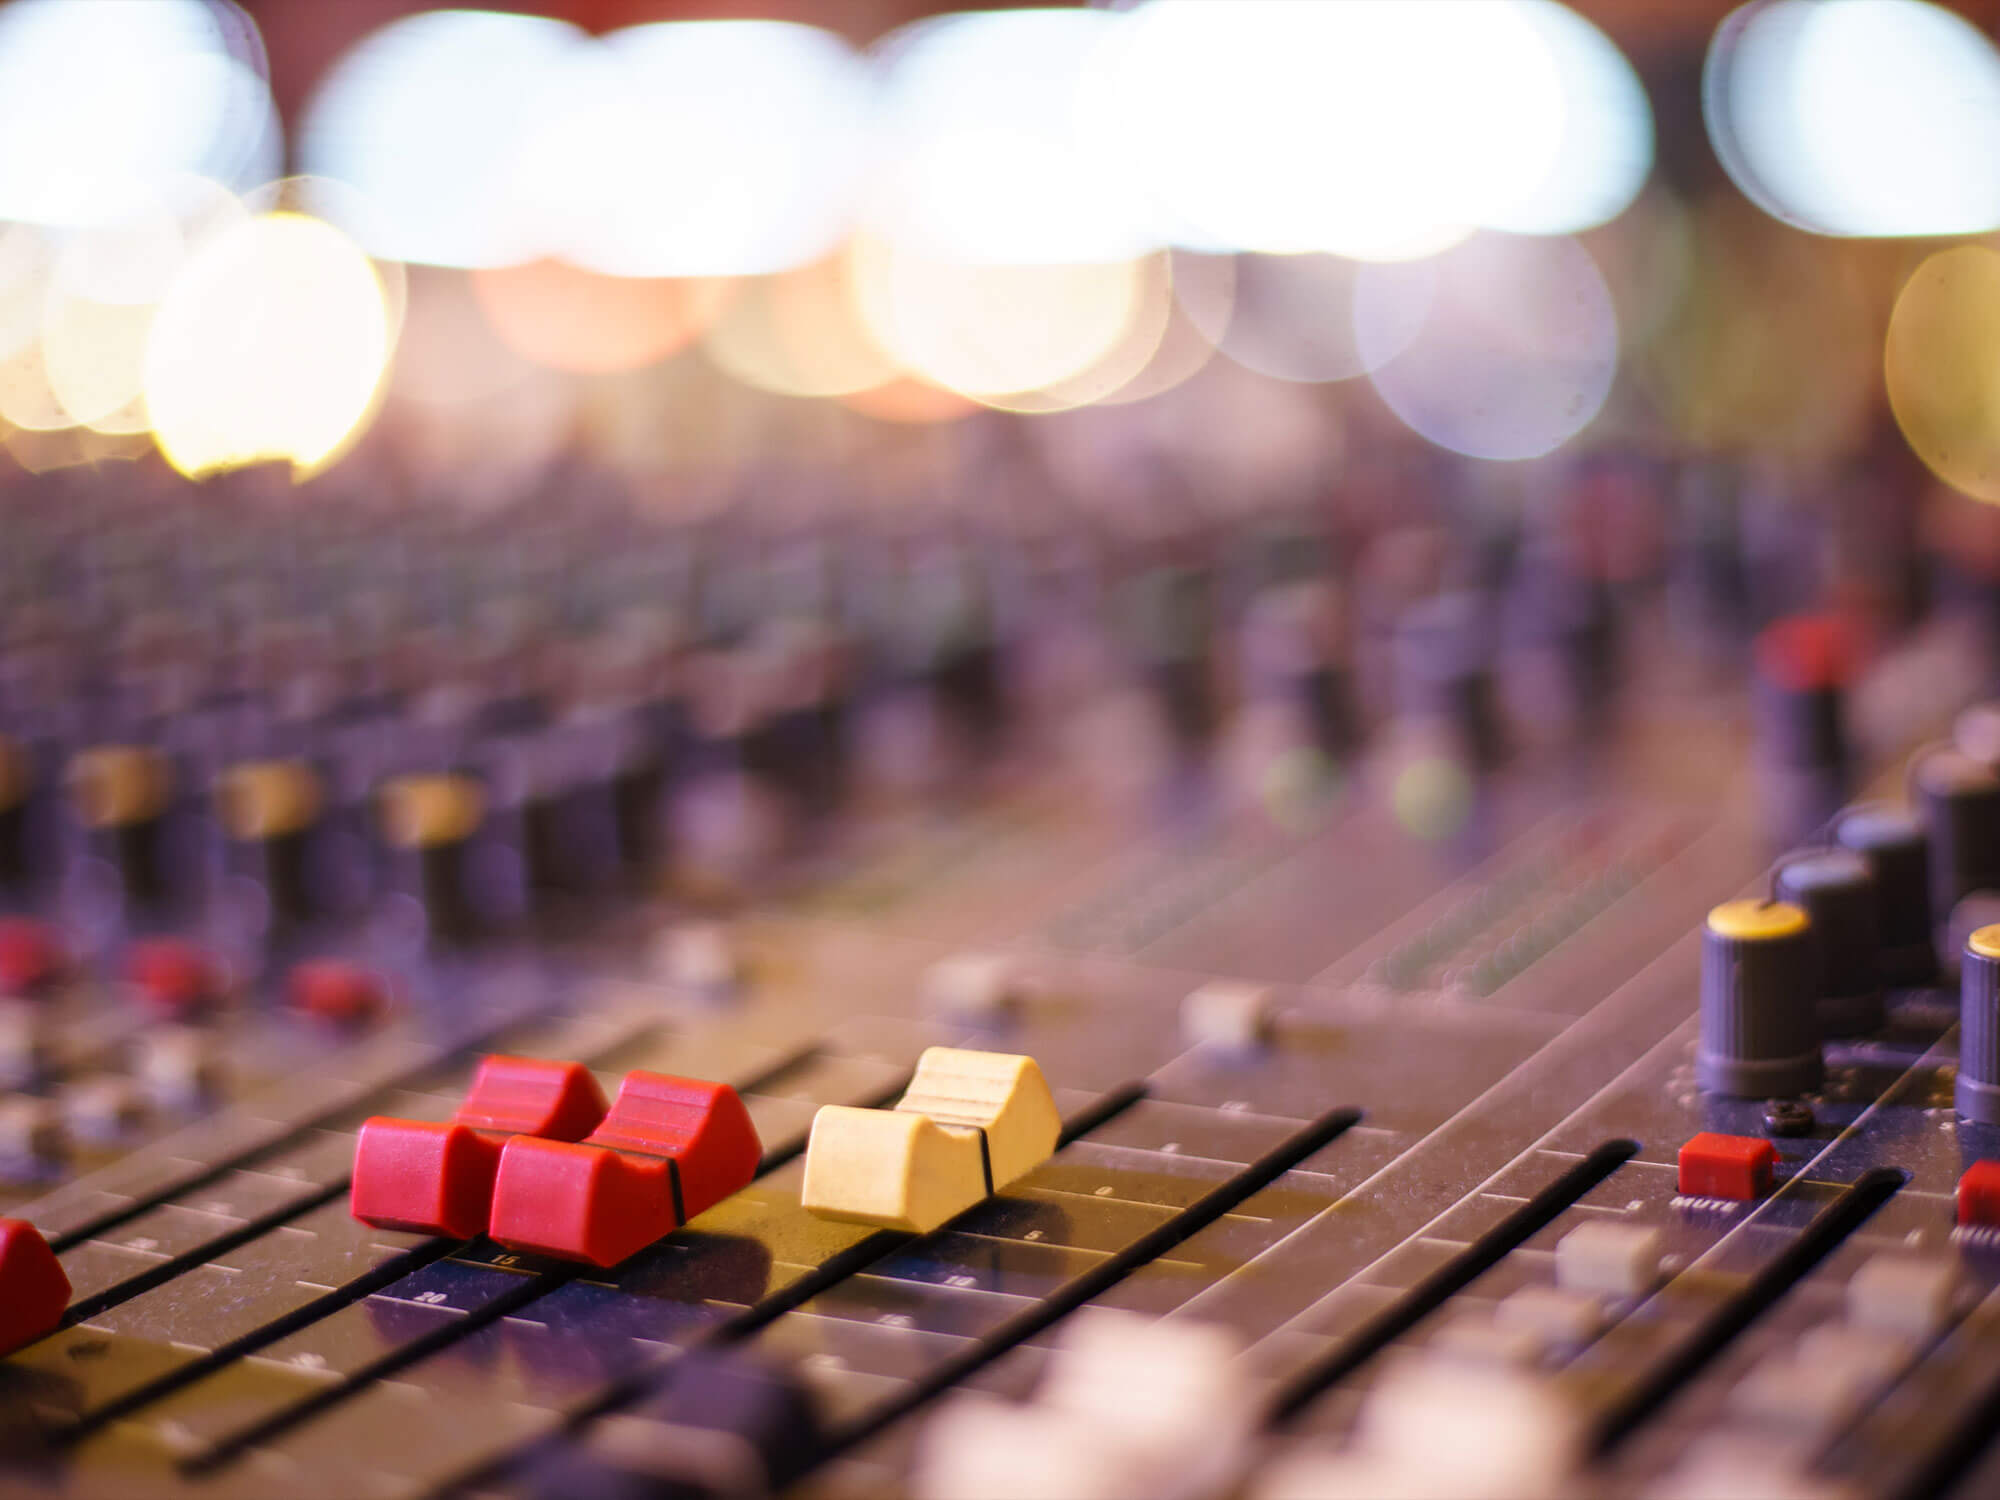 Image of faders on a mixing desk in a music studio